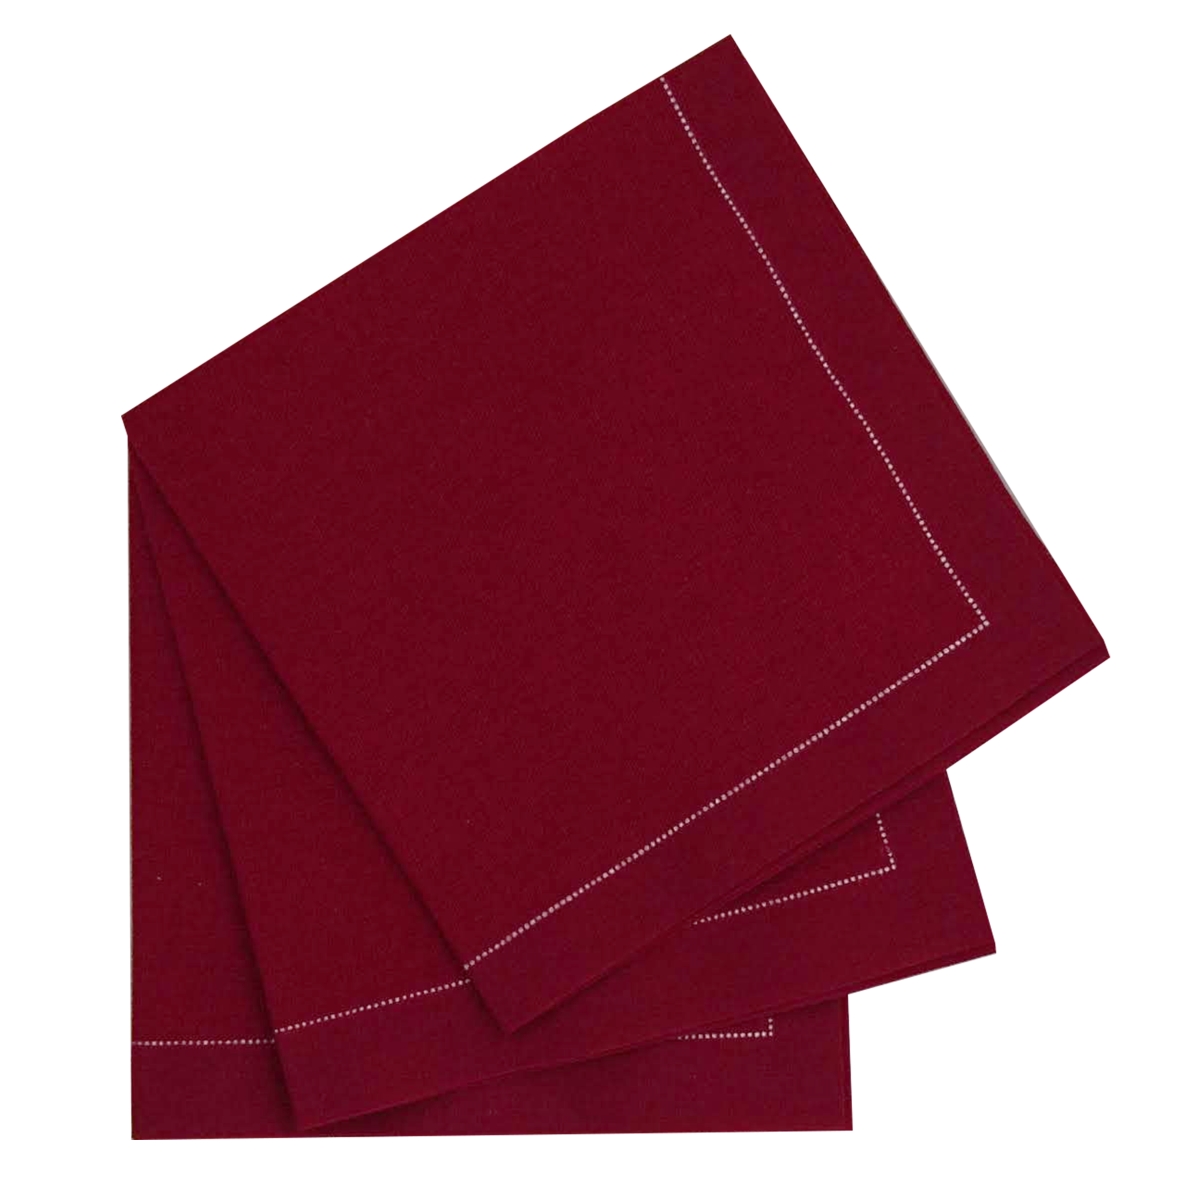 Packnwood 8NPSVCR40RD 15.8 x 15.8 in. Luxury Wine Cotton Table Napkin, Red